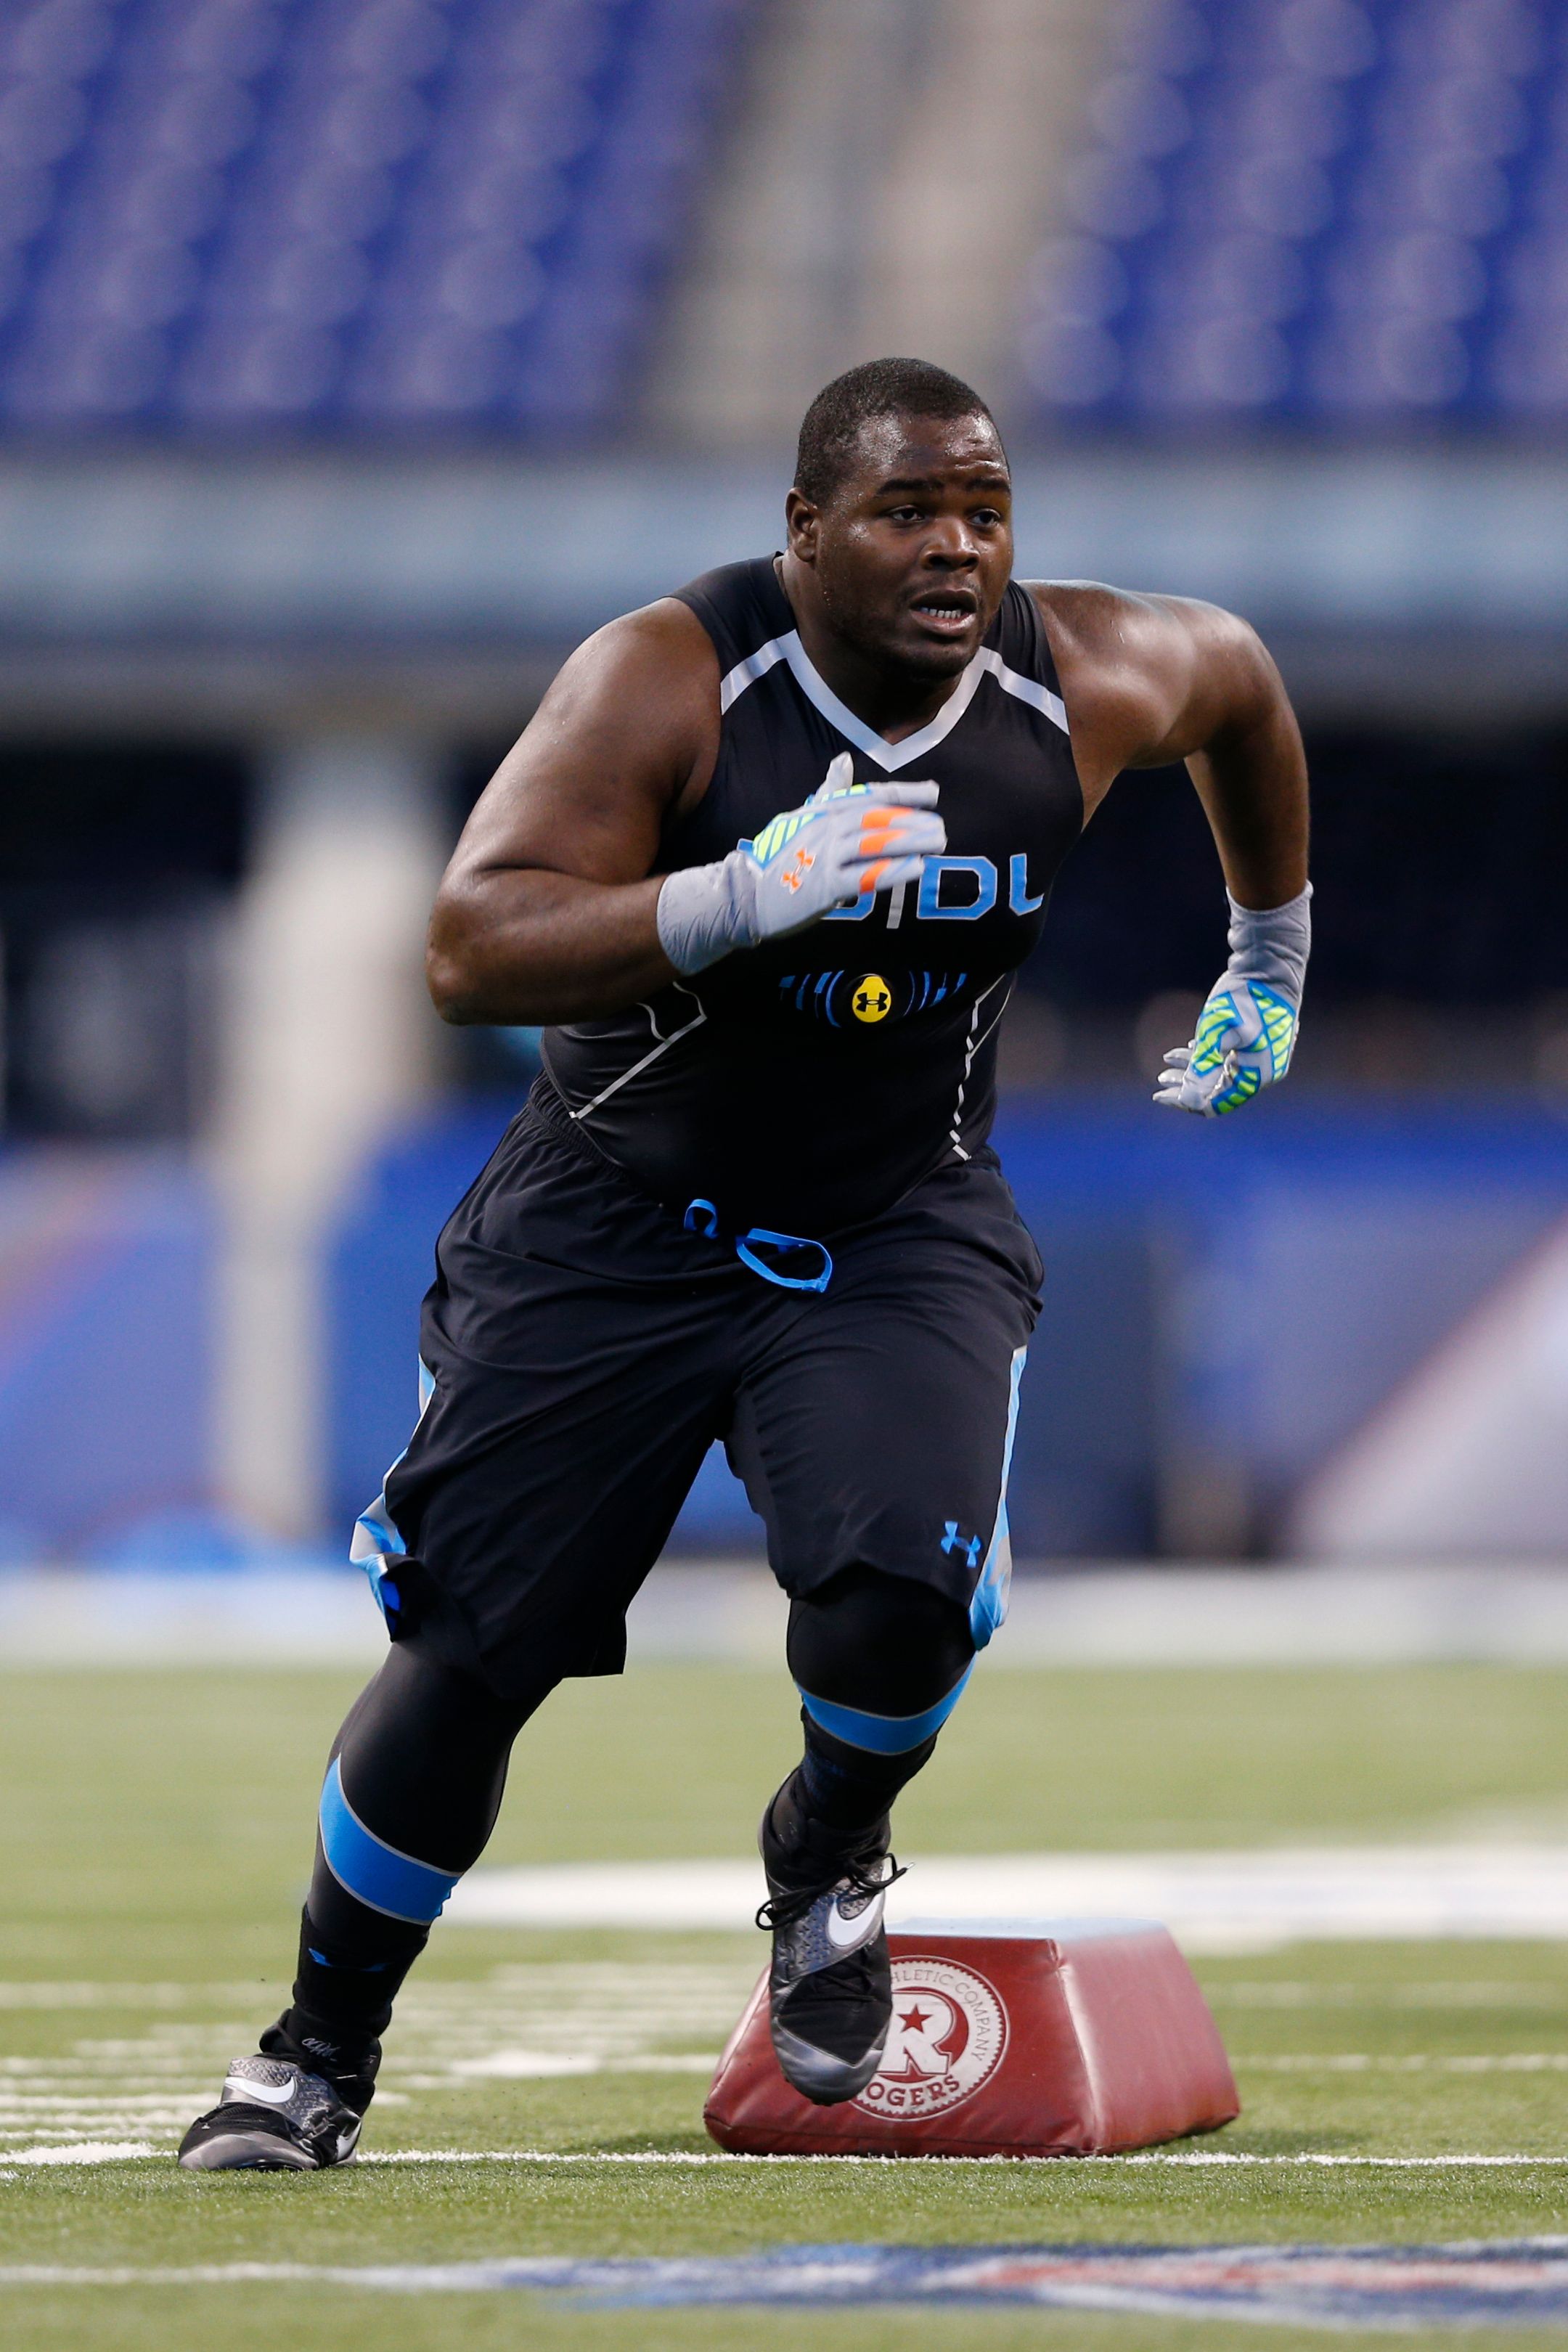 Louis Nix works out during the NFL Combine at Lucas Oil Stadium on February 24, 2014, in Indianapolis, Indiana | Photo: Joe Robbins/Getty Images